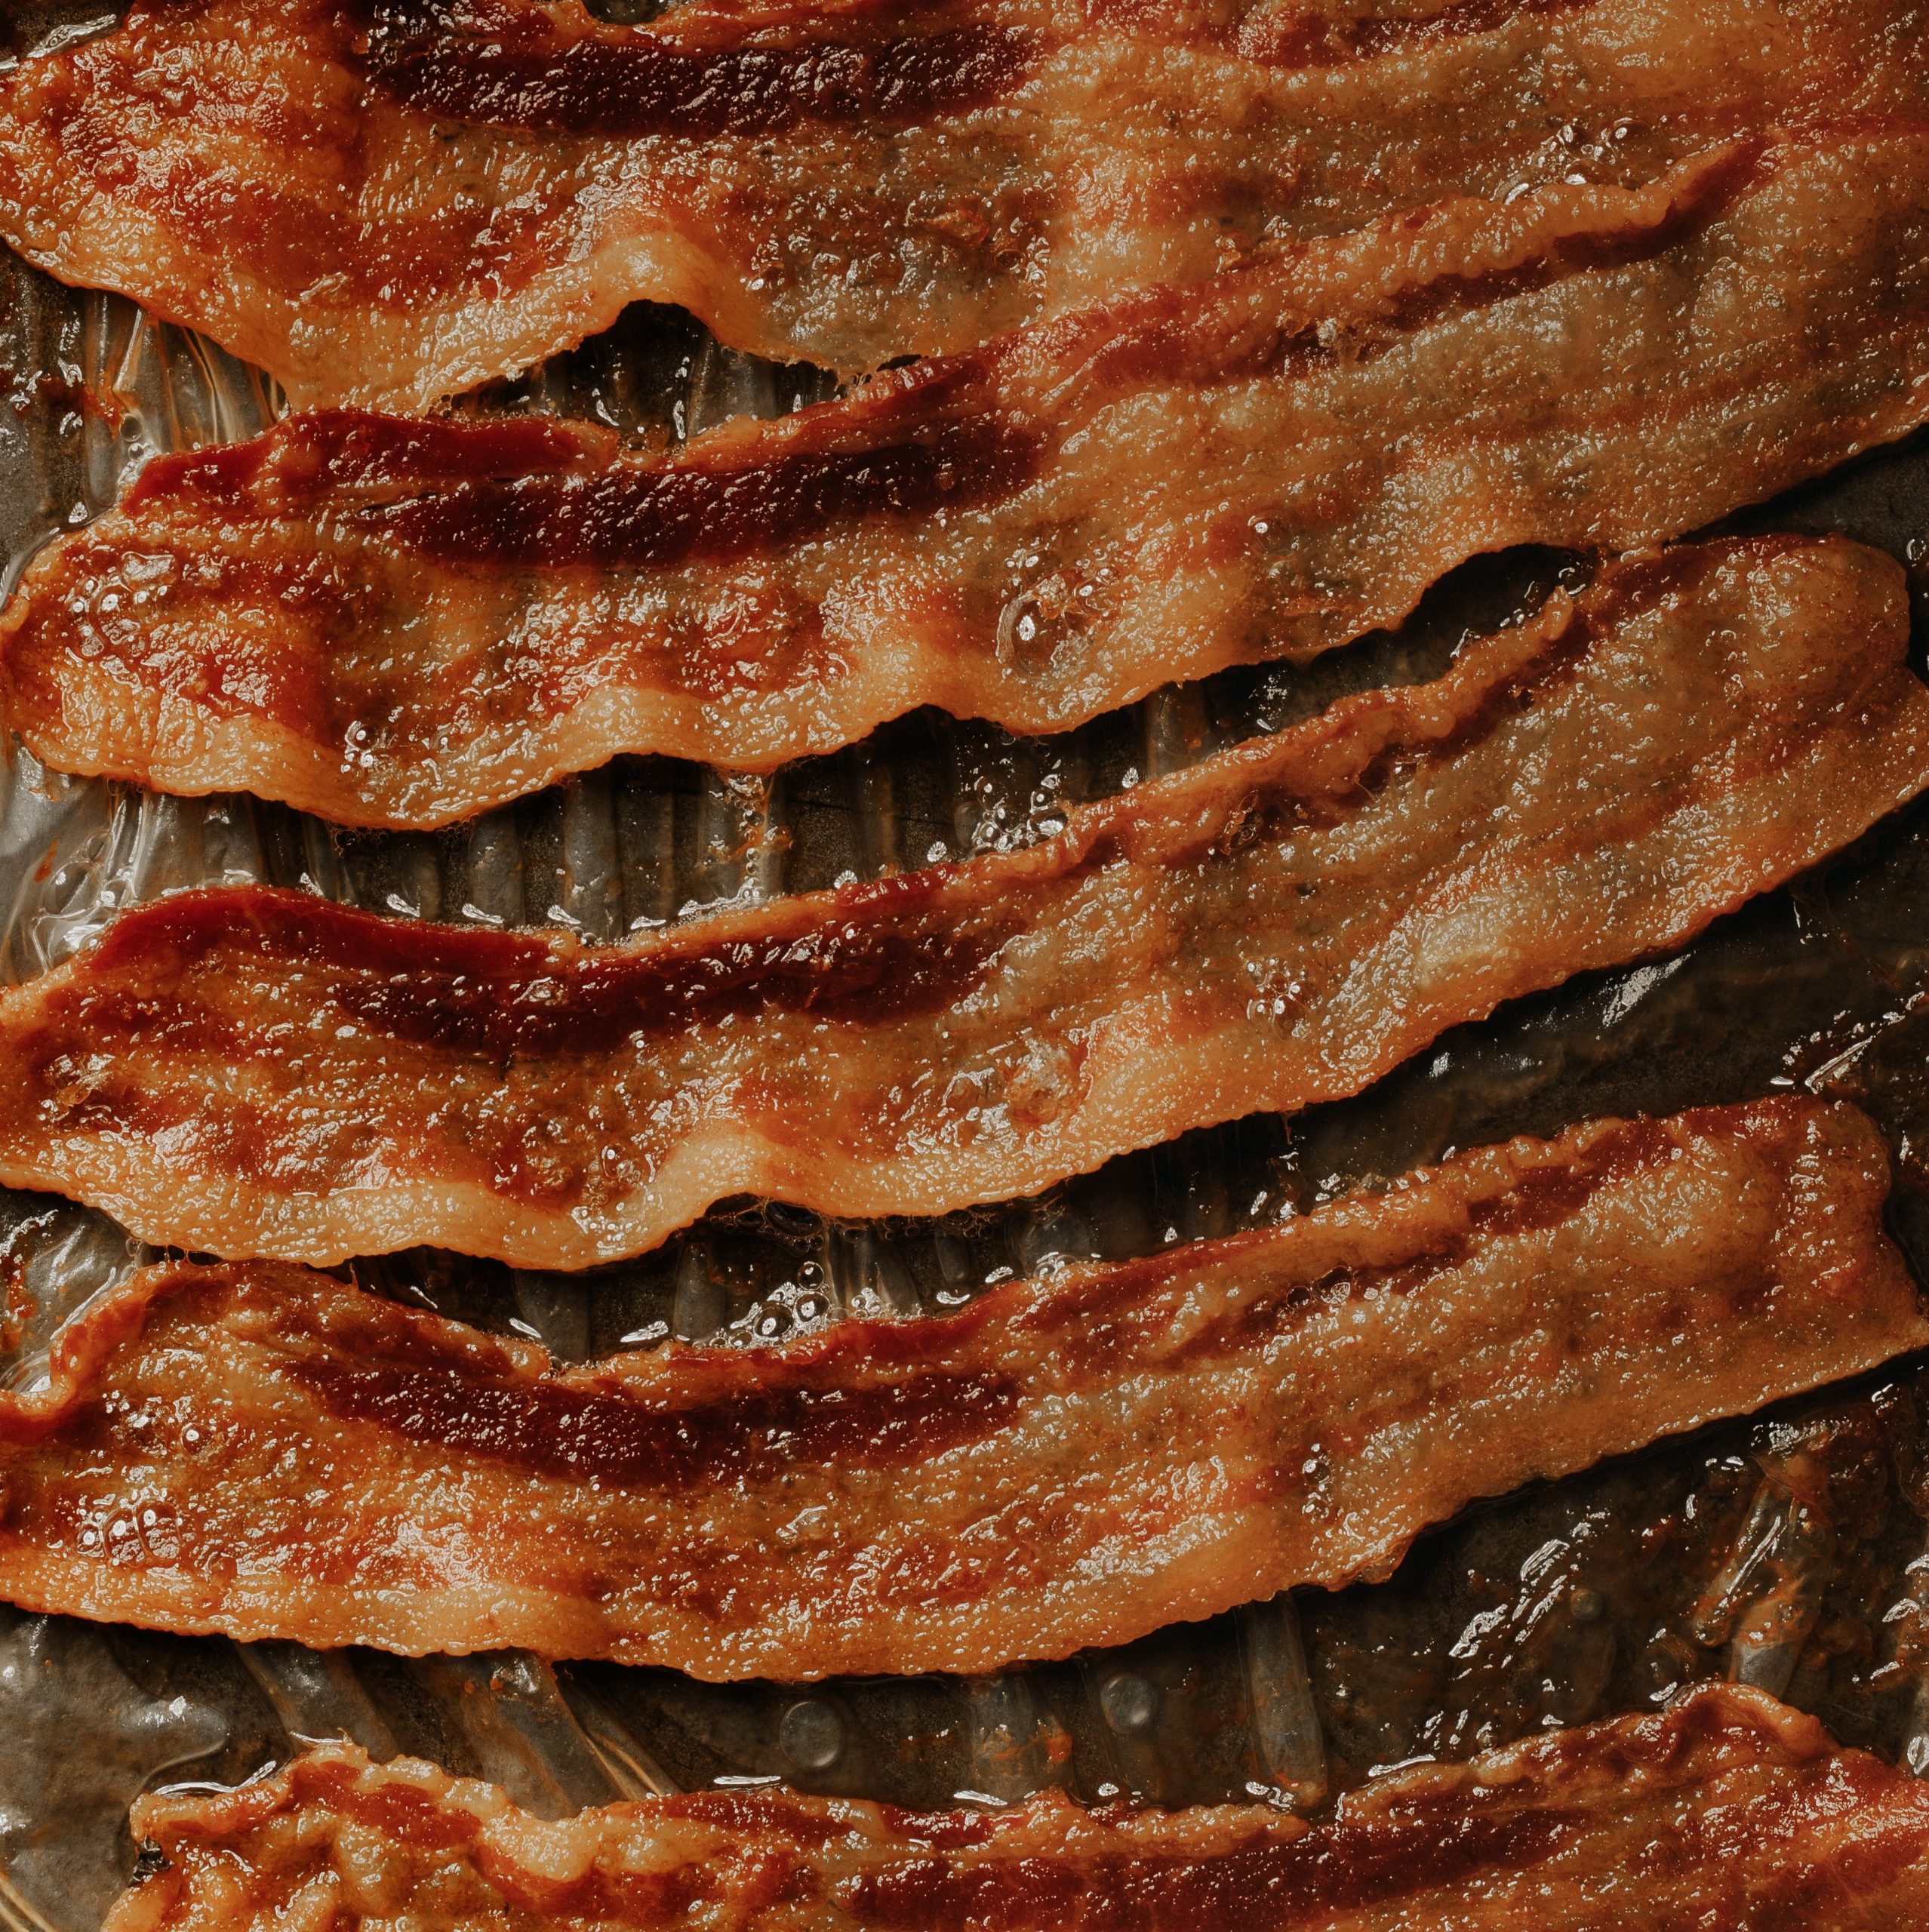 Convection Oven Bacon – How to Cook Crispy Bacon in Convection Oven